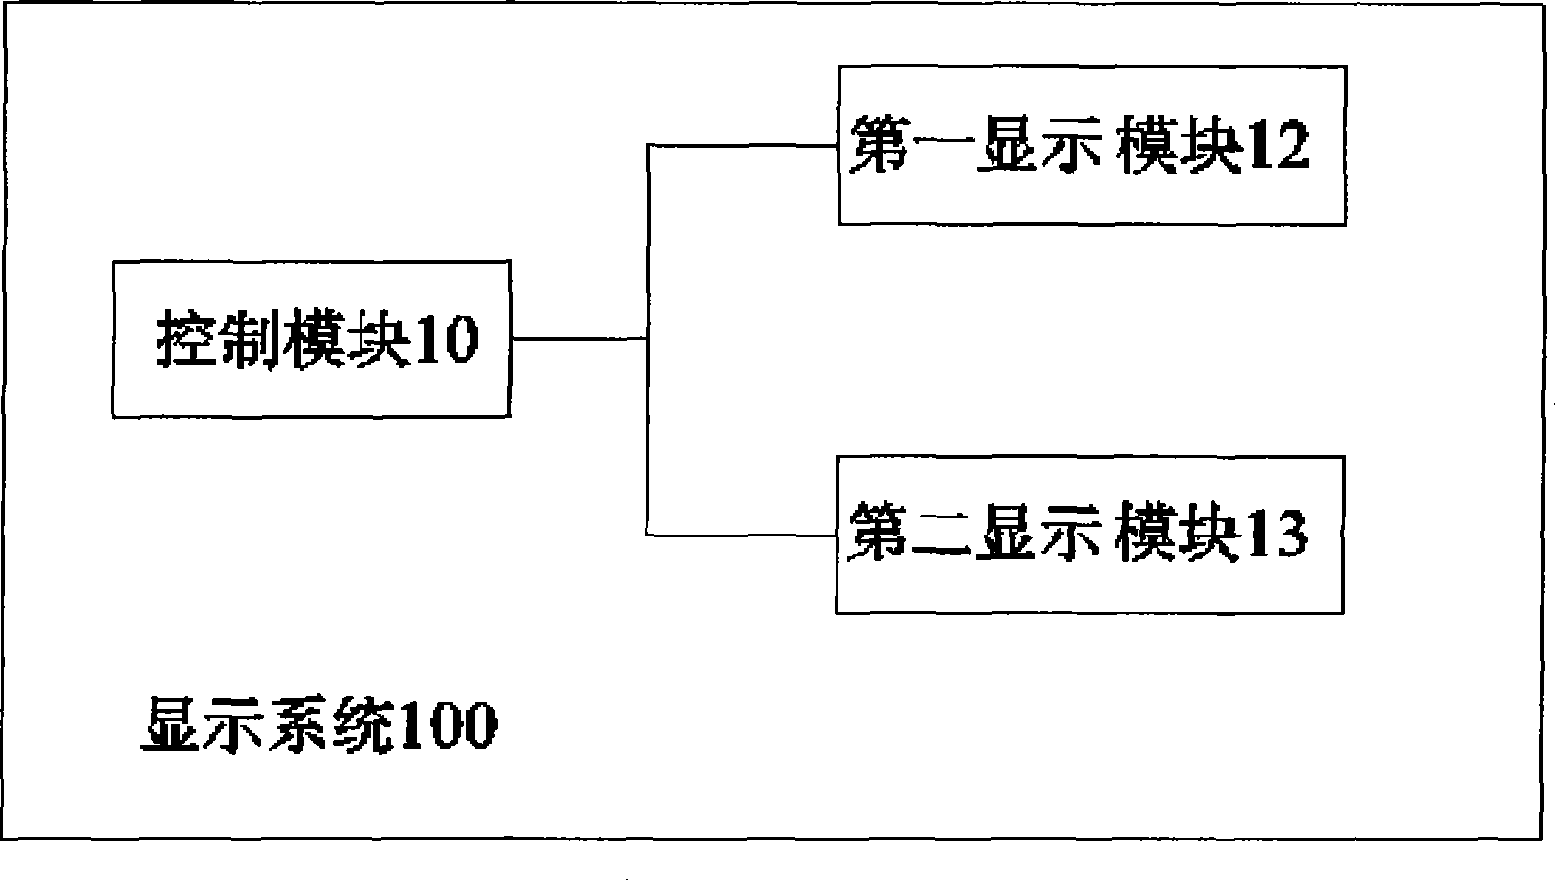 Display system and display device